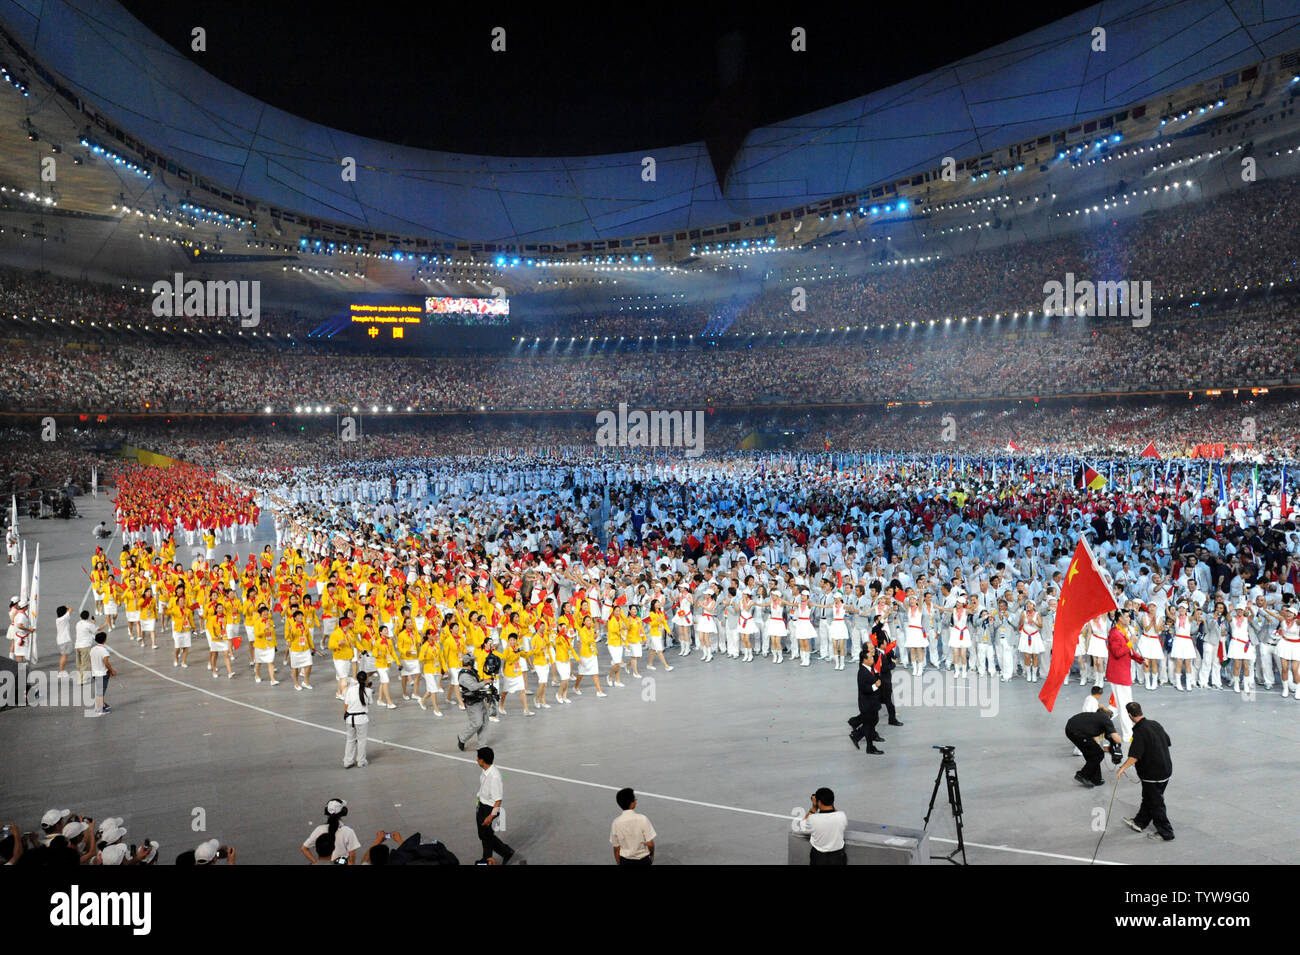 The Chinese team marches into the National Stadium, called the Bird's Nest, during the Opening Ceremony of the 2008 Summer Olympics in Beijing on August 8, 2008.   The Summer Games will run through August 24, 2008.   (UPI Photo/Pat Benic)   REPEAT Stock Photo